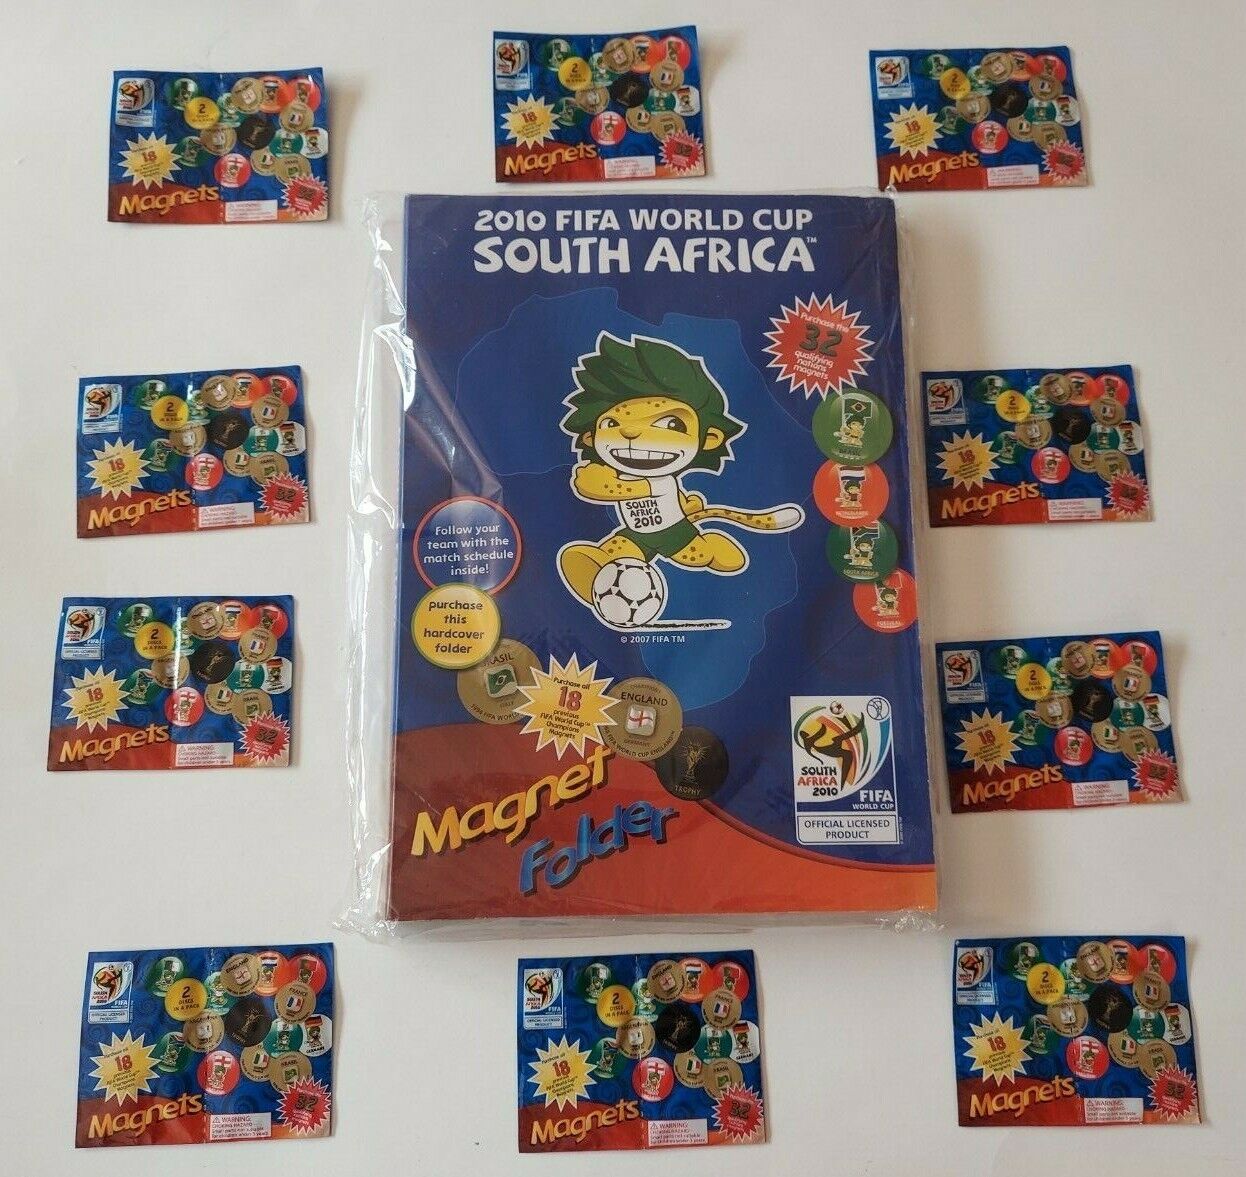 FIFA World Cup 2010 South Africa Magnets Official Album & 10 New Magnet Packs